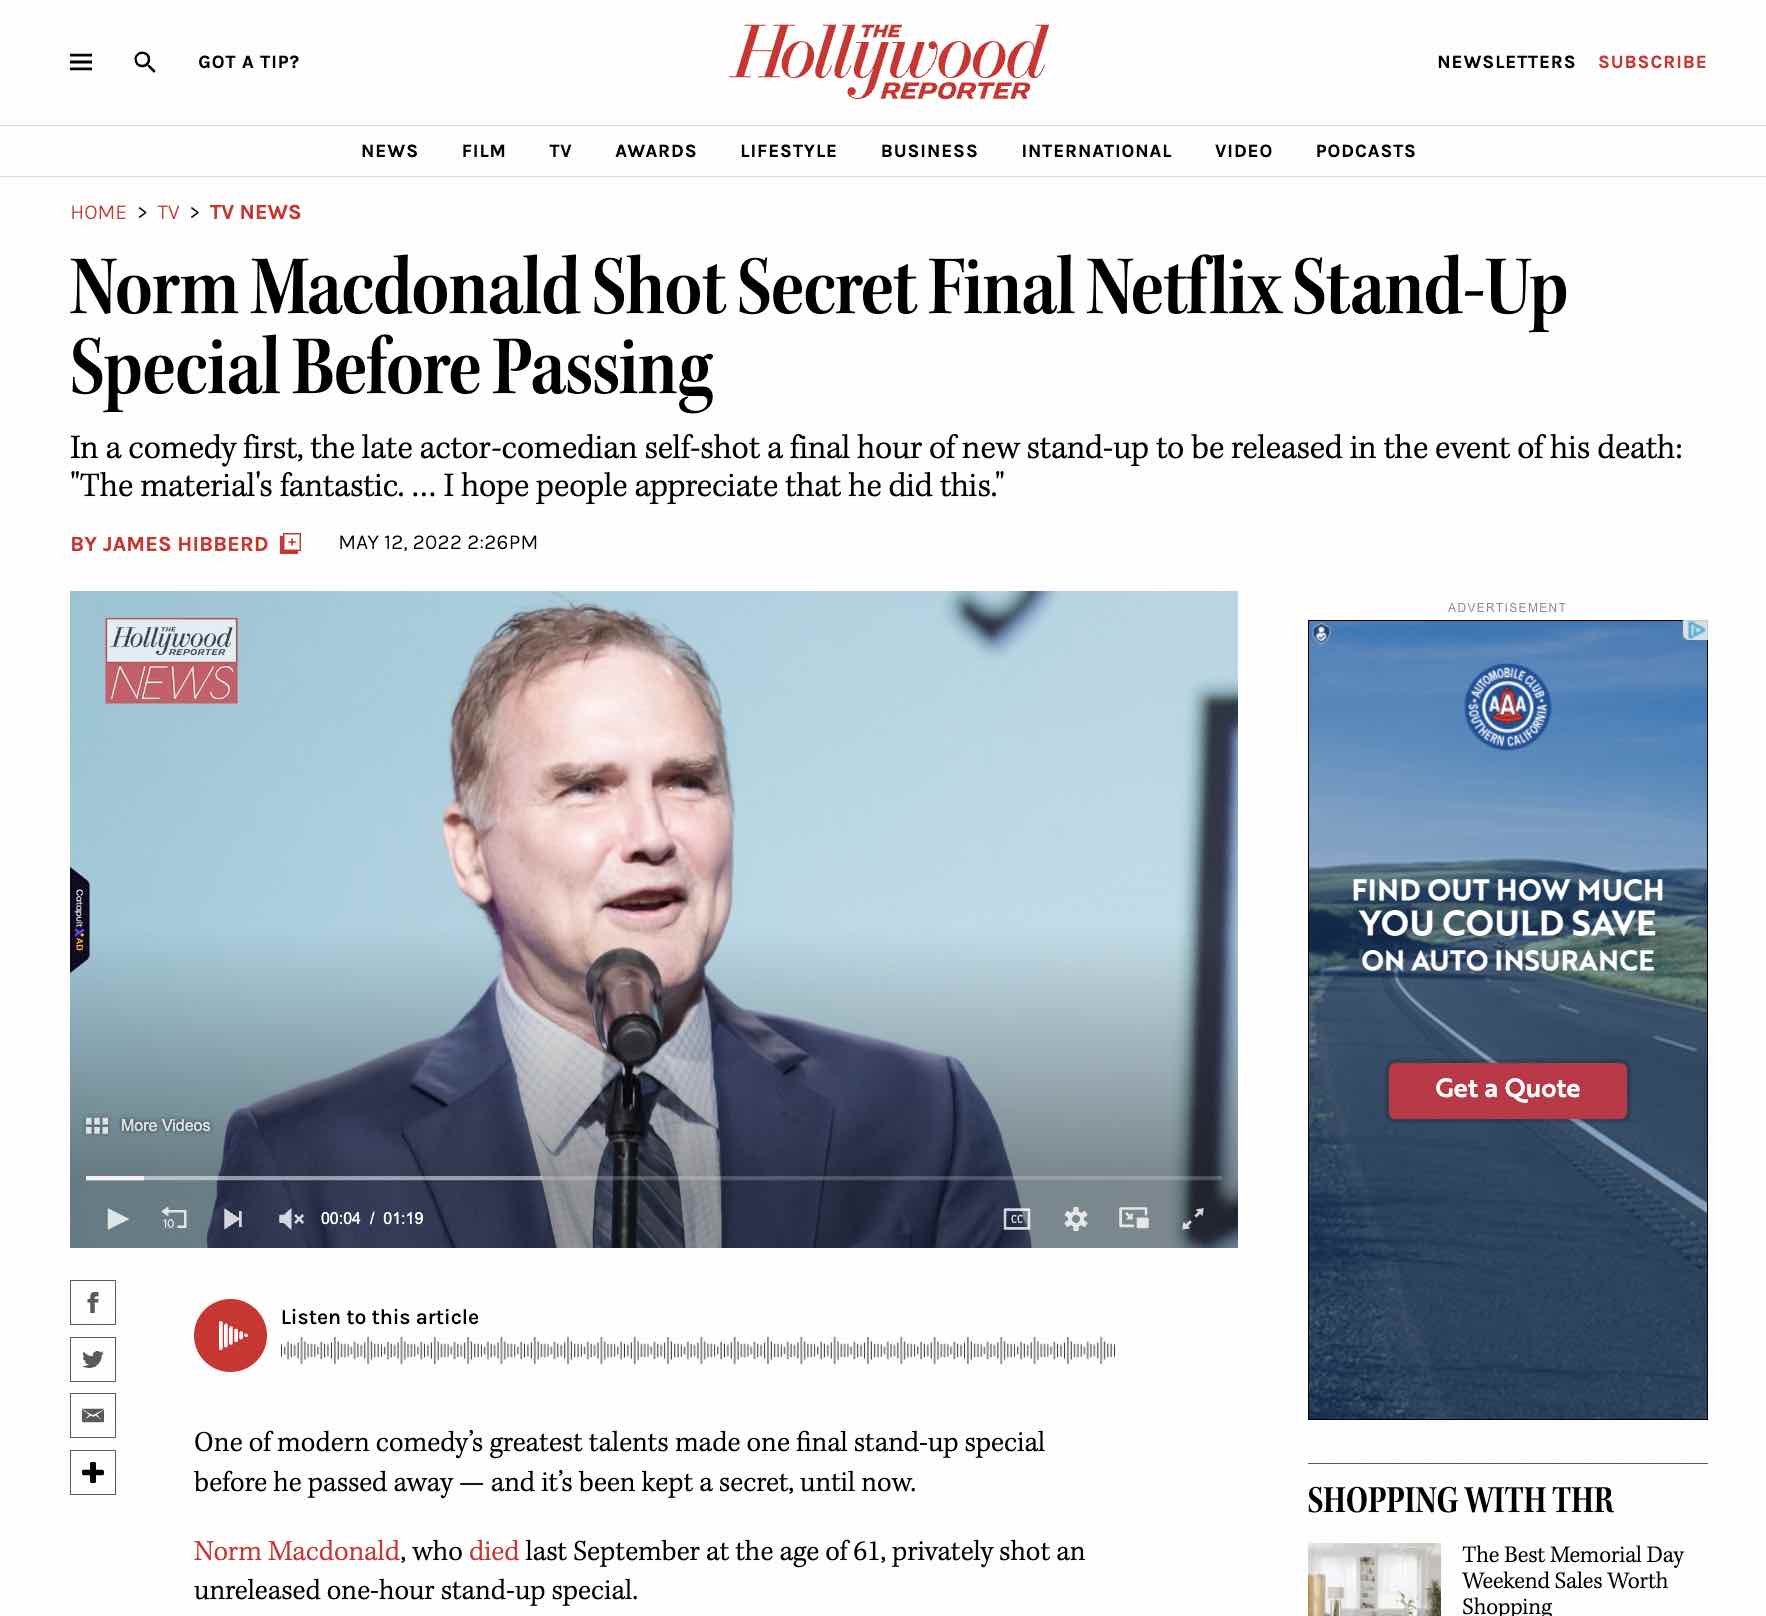 Featured image for “PLEASE DON’T MISS NORM MCDONALD ‘ NOTHING SPECIAL’”